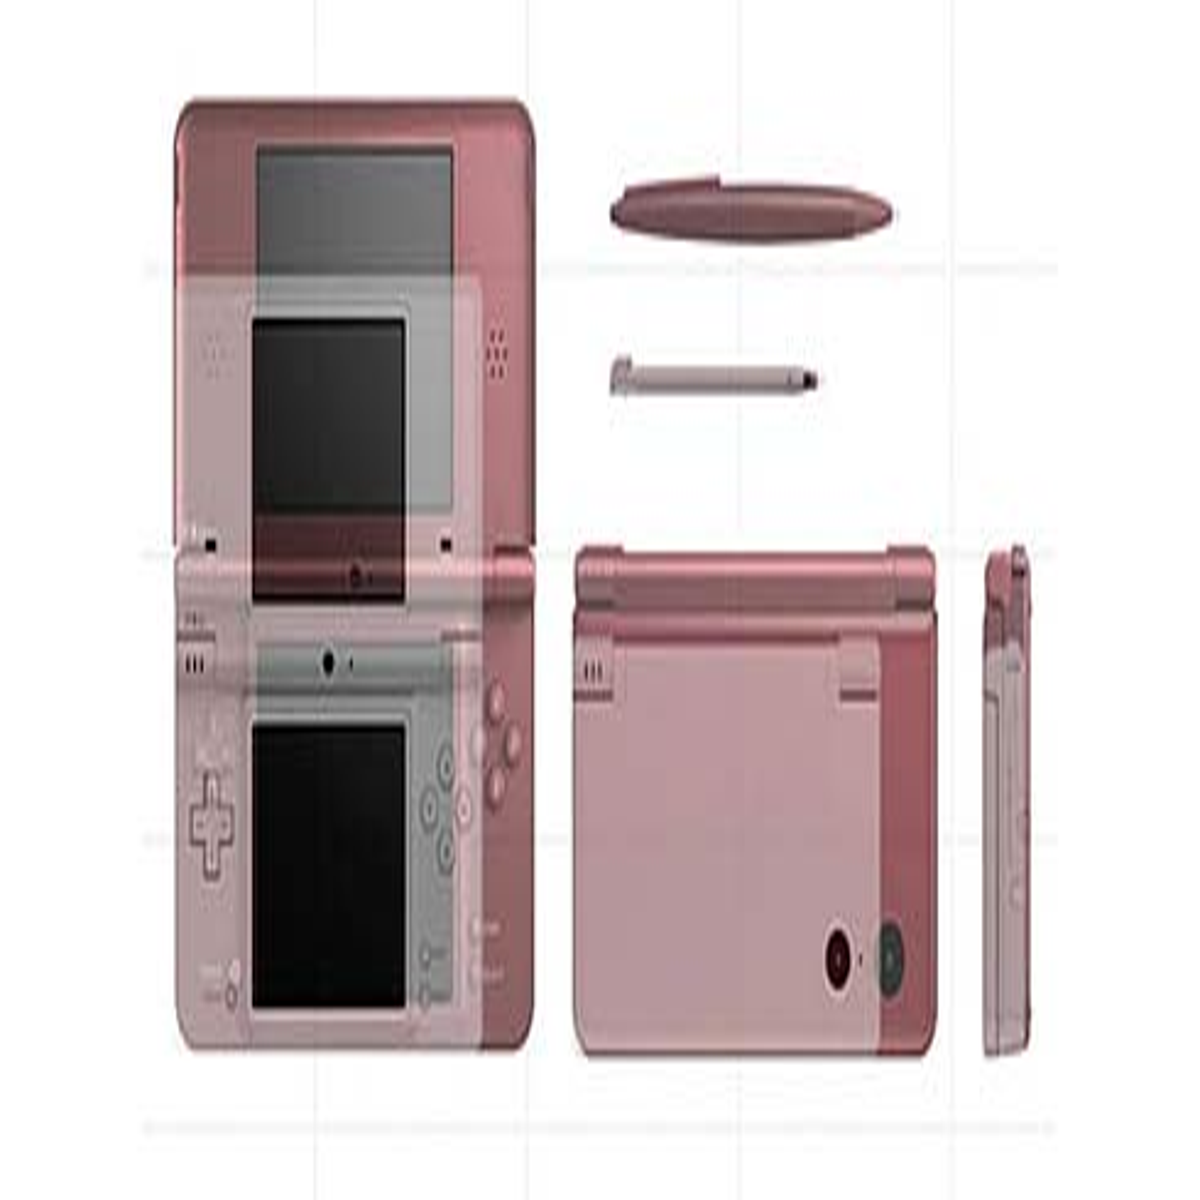 Nintendo Plans a Rosy Future for DSi XL